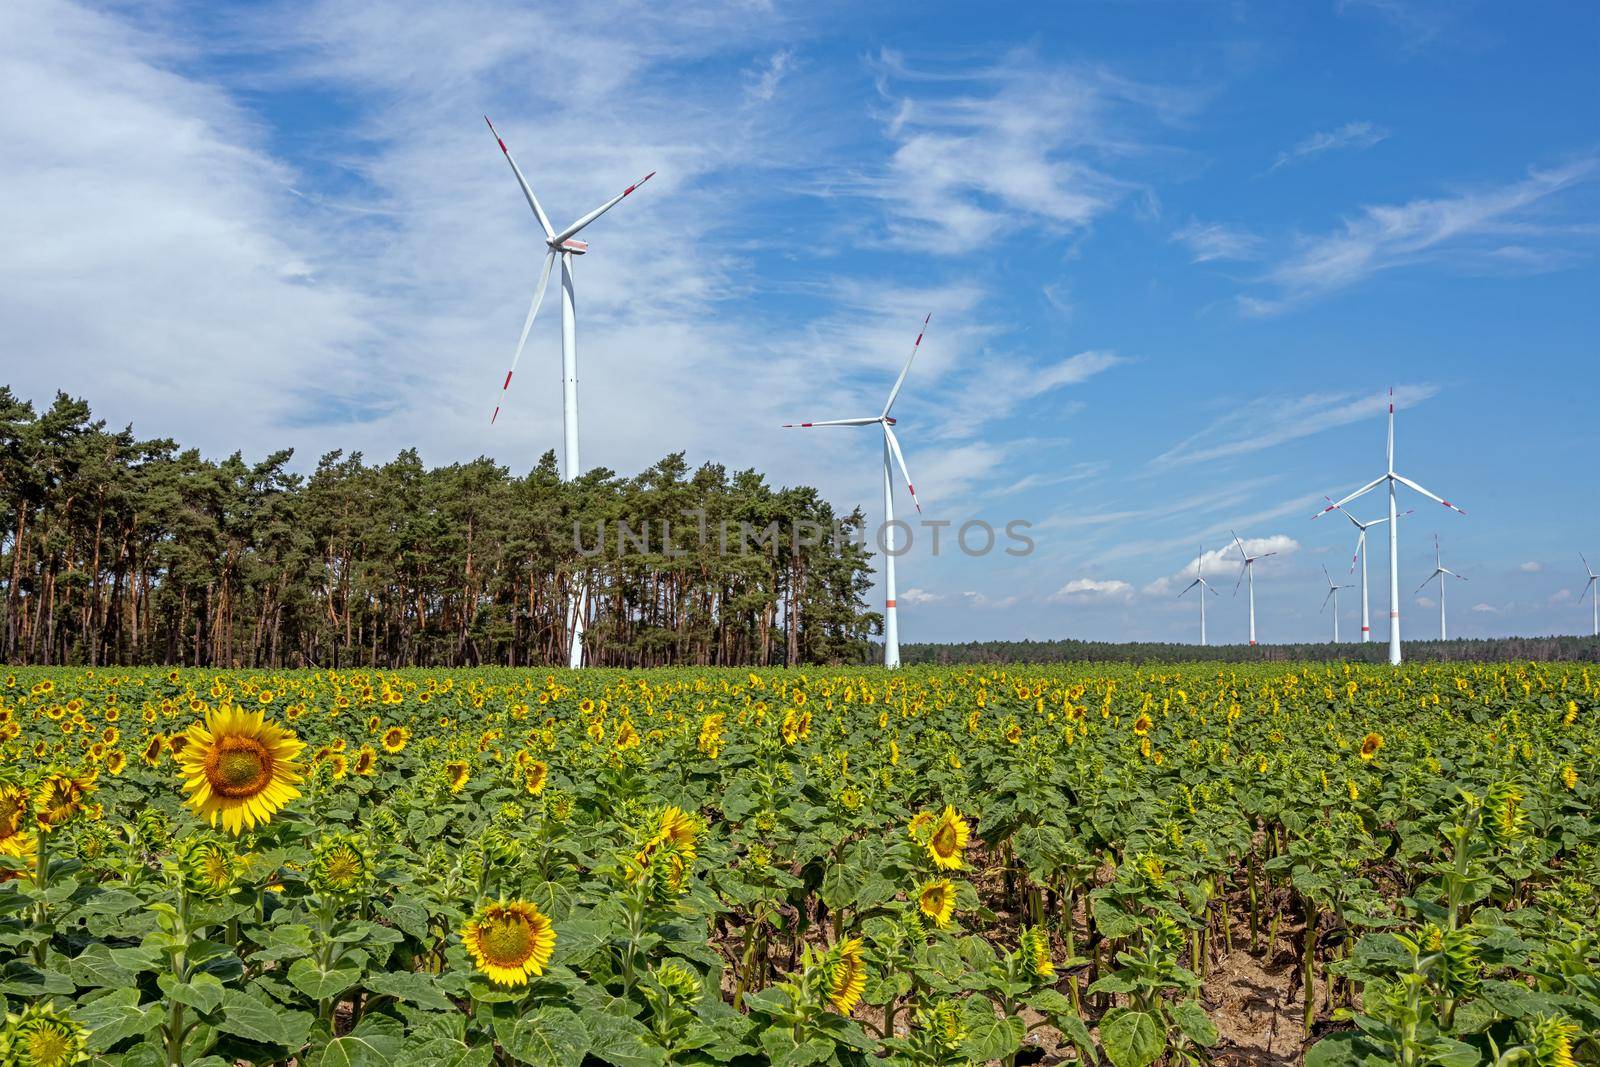 Sunflowers and wind turbines seen in rural Germany